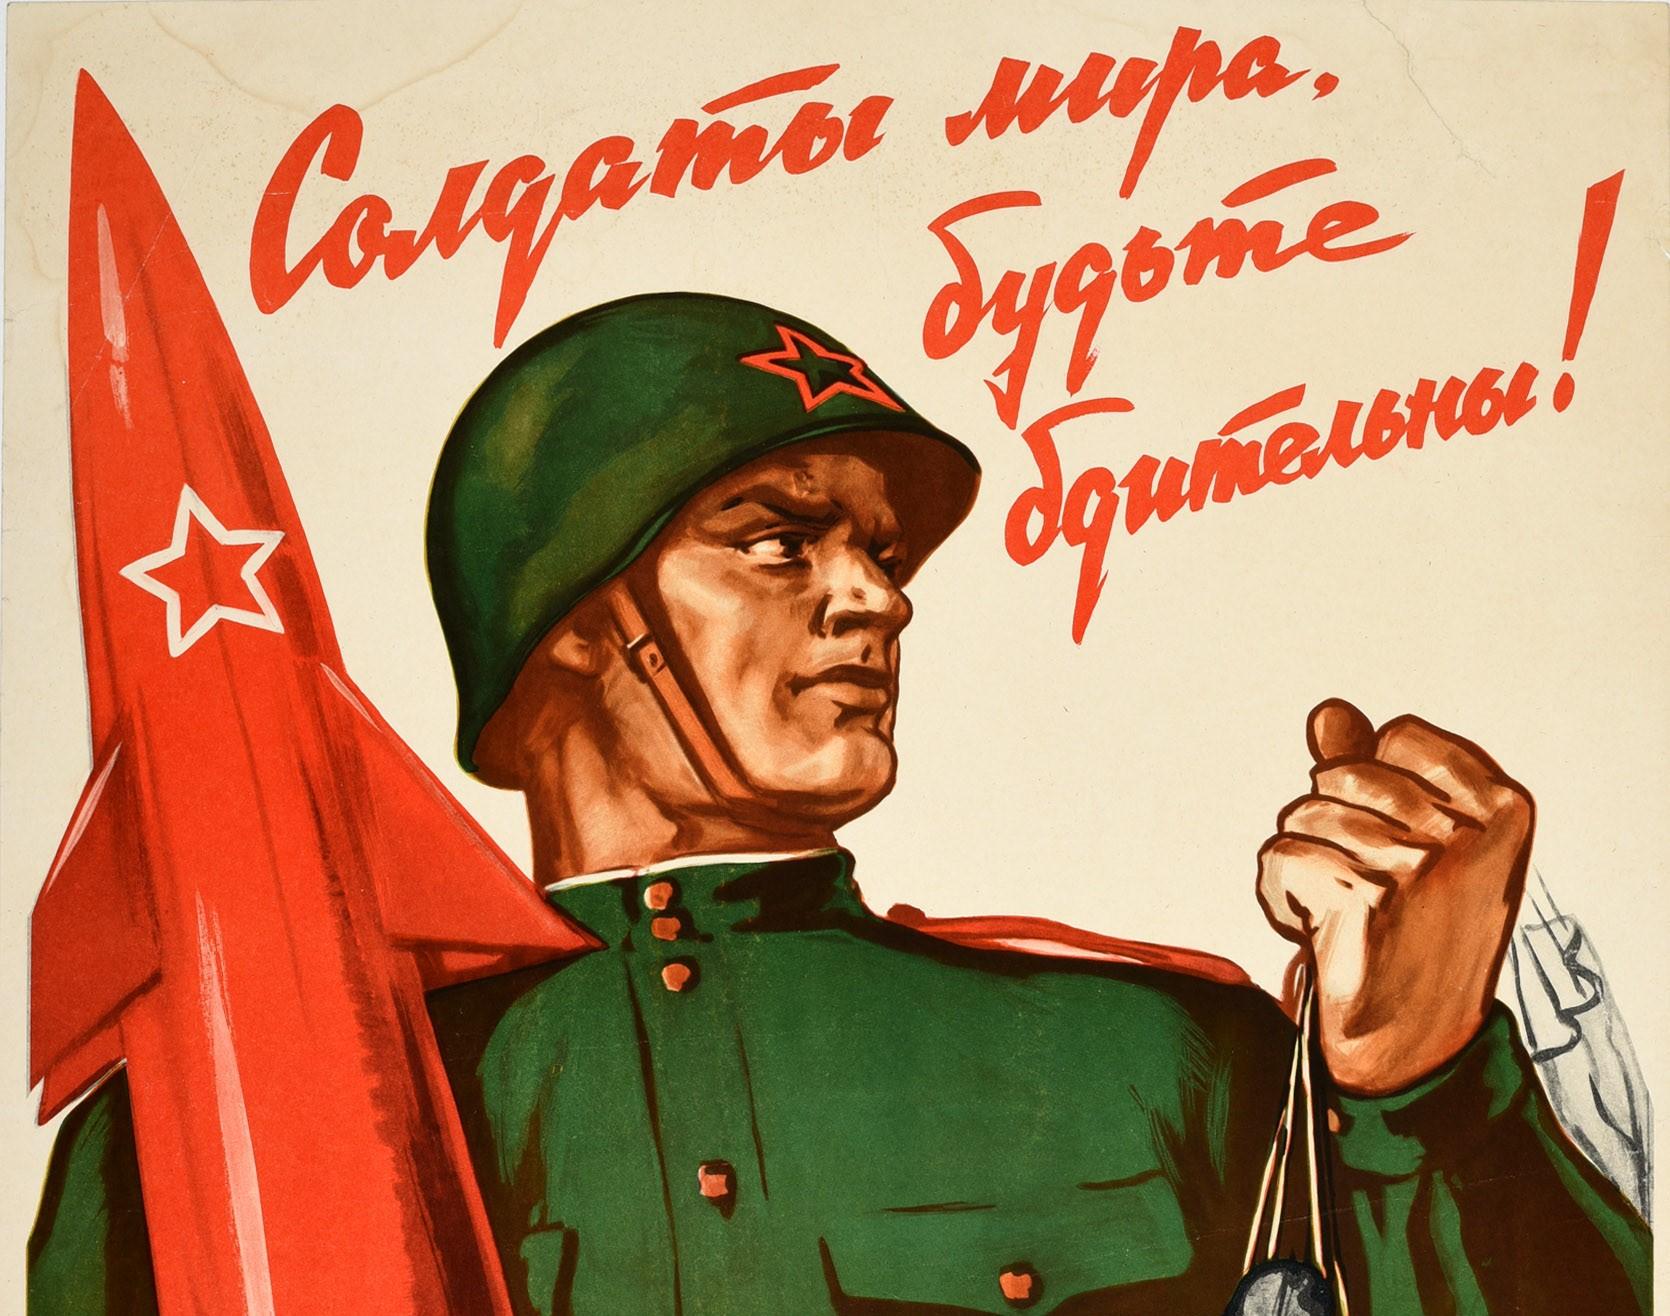 Original vintage Cold War era Soviet propaganda poster - Soldiers of the Peace, Be Vigilant! - featuring a dynamic image of a soldier in uniform holding a missile rocket marked with a Soviet star over a shoulder with one arm next to the bold red